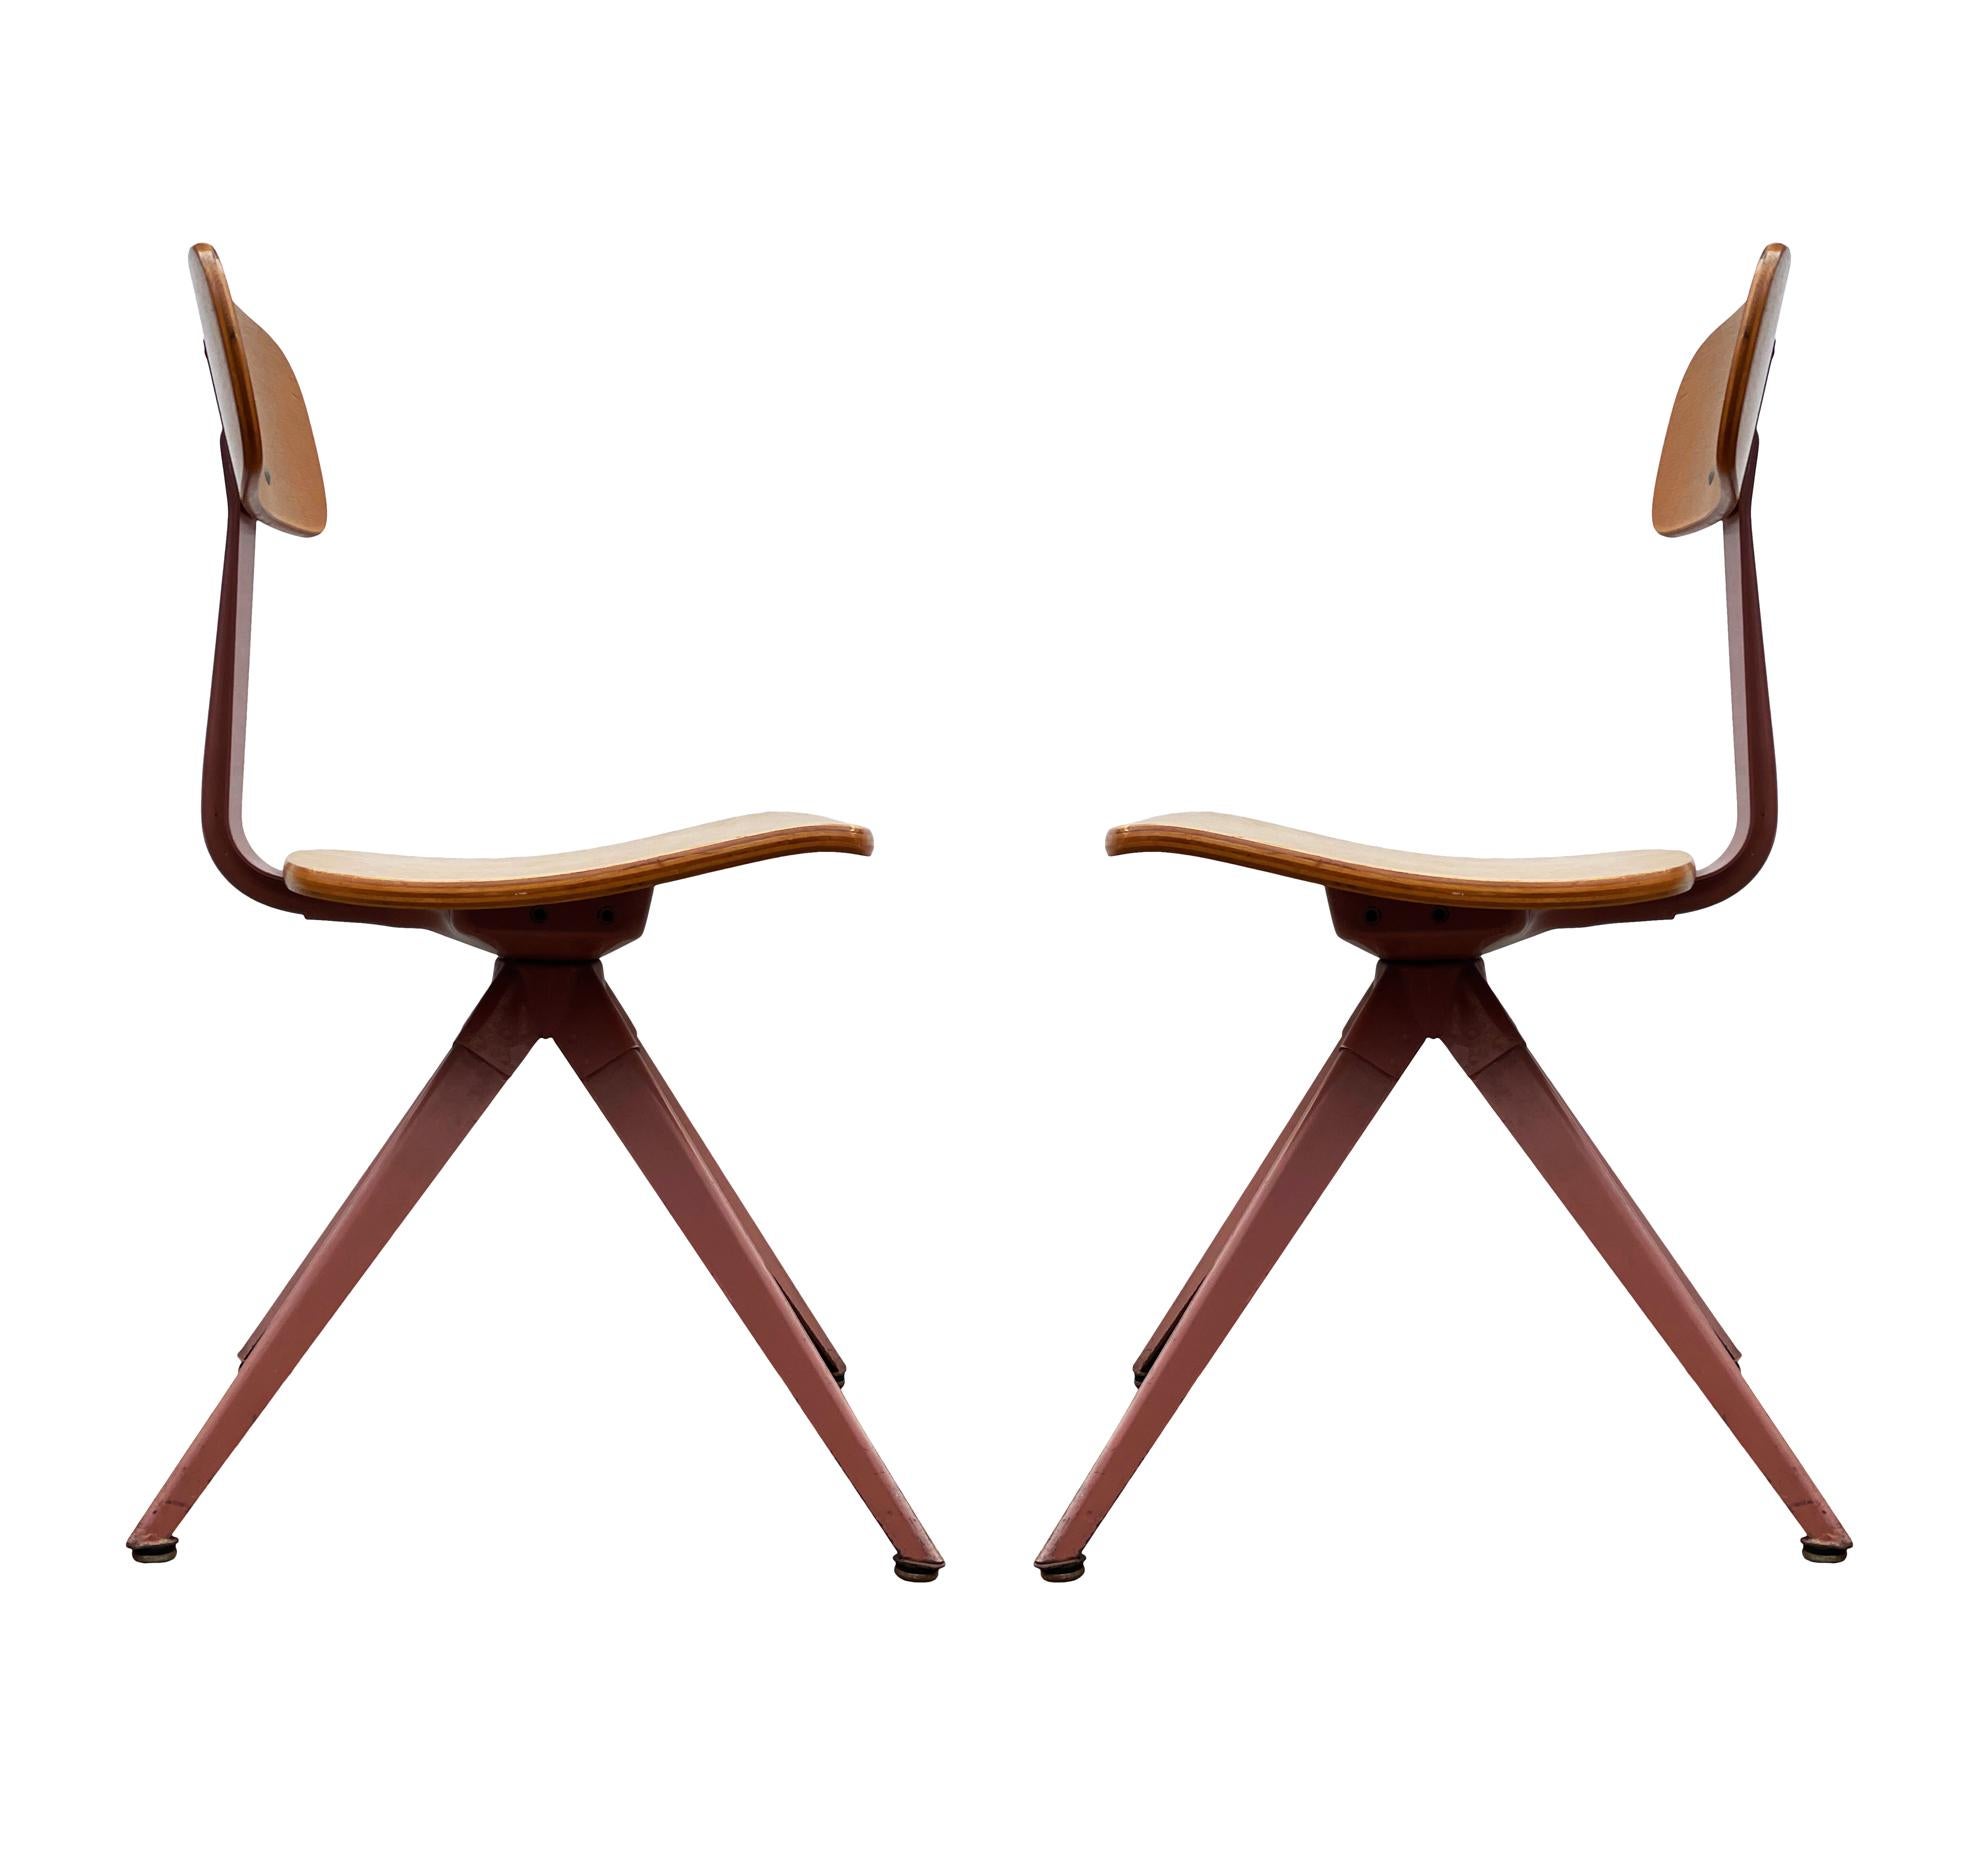 Mid-20th Century Matching Pair of Mid Century Industrial Modern Steel & Bent Wood Side Chairs For Sale